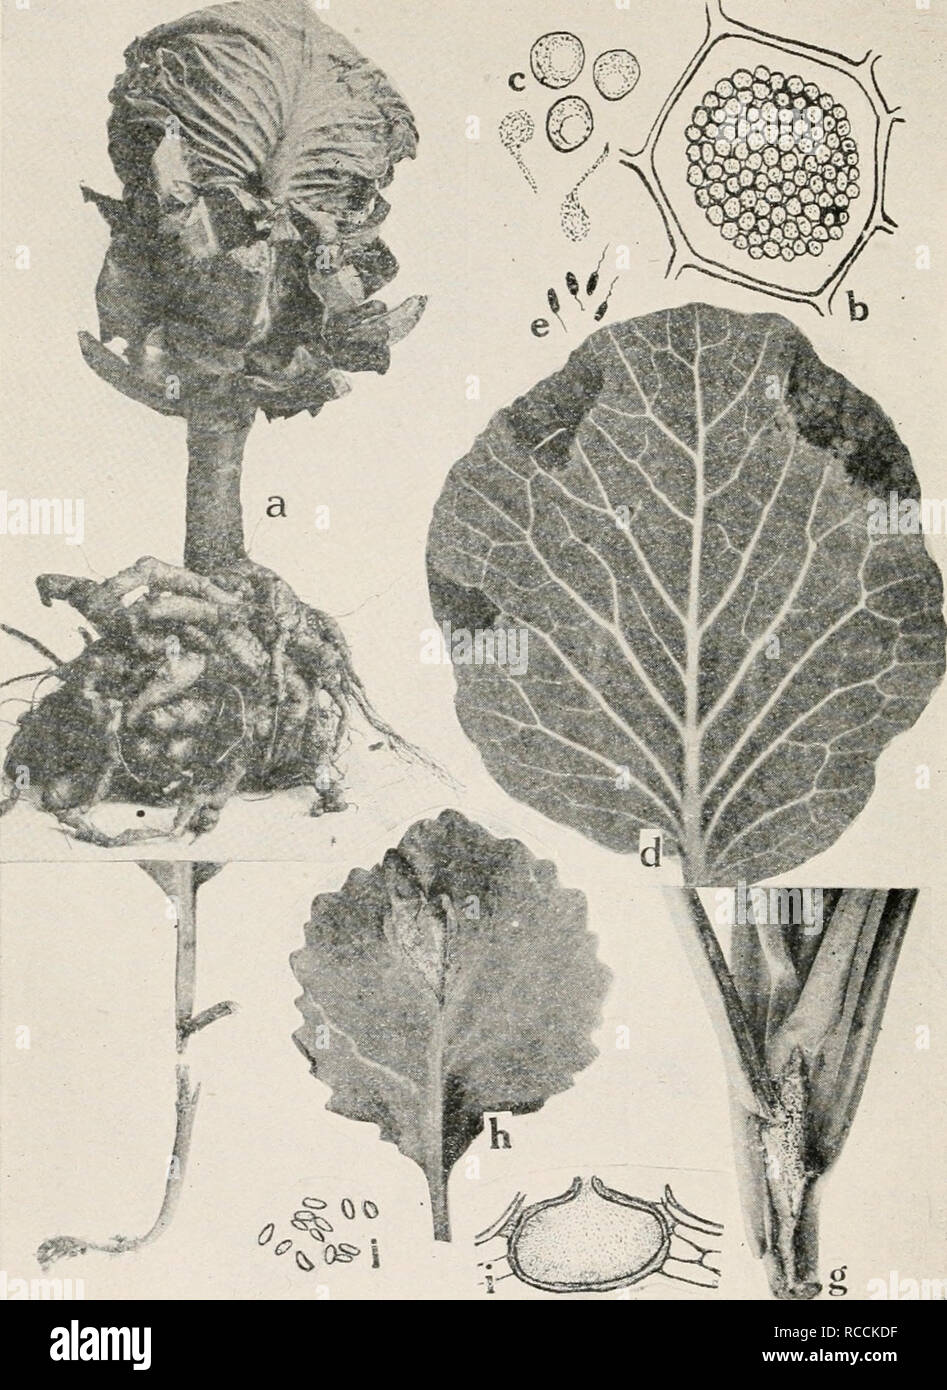 . Diseases of truck crops and their control. Plants -- Diseases. Fig. 30. Cabbage Diseases. a. Club root (after Cunningham), b. cell filled with spores of the club root or- ganism, c. spores and swarm spores of Plasmodiophora brassica (b. and c. after Chuff), d. black rot of cabbage (after F. C. Stewart), c. individual black rot germs of Pseudomonas campeslris, f. black-leg on young cabbage seedling, g. black-leg lesion on foot of older cabbage plant, h. black-leg lesion on cabbage leaf, i. pycnidium of Phoma oleracecE.j. pycnospores of P. olcracece (i. a.ndj. after Manns),. Please note that t Stock Photo